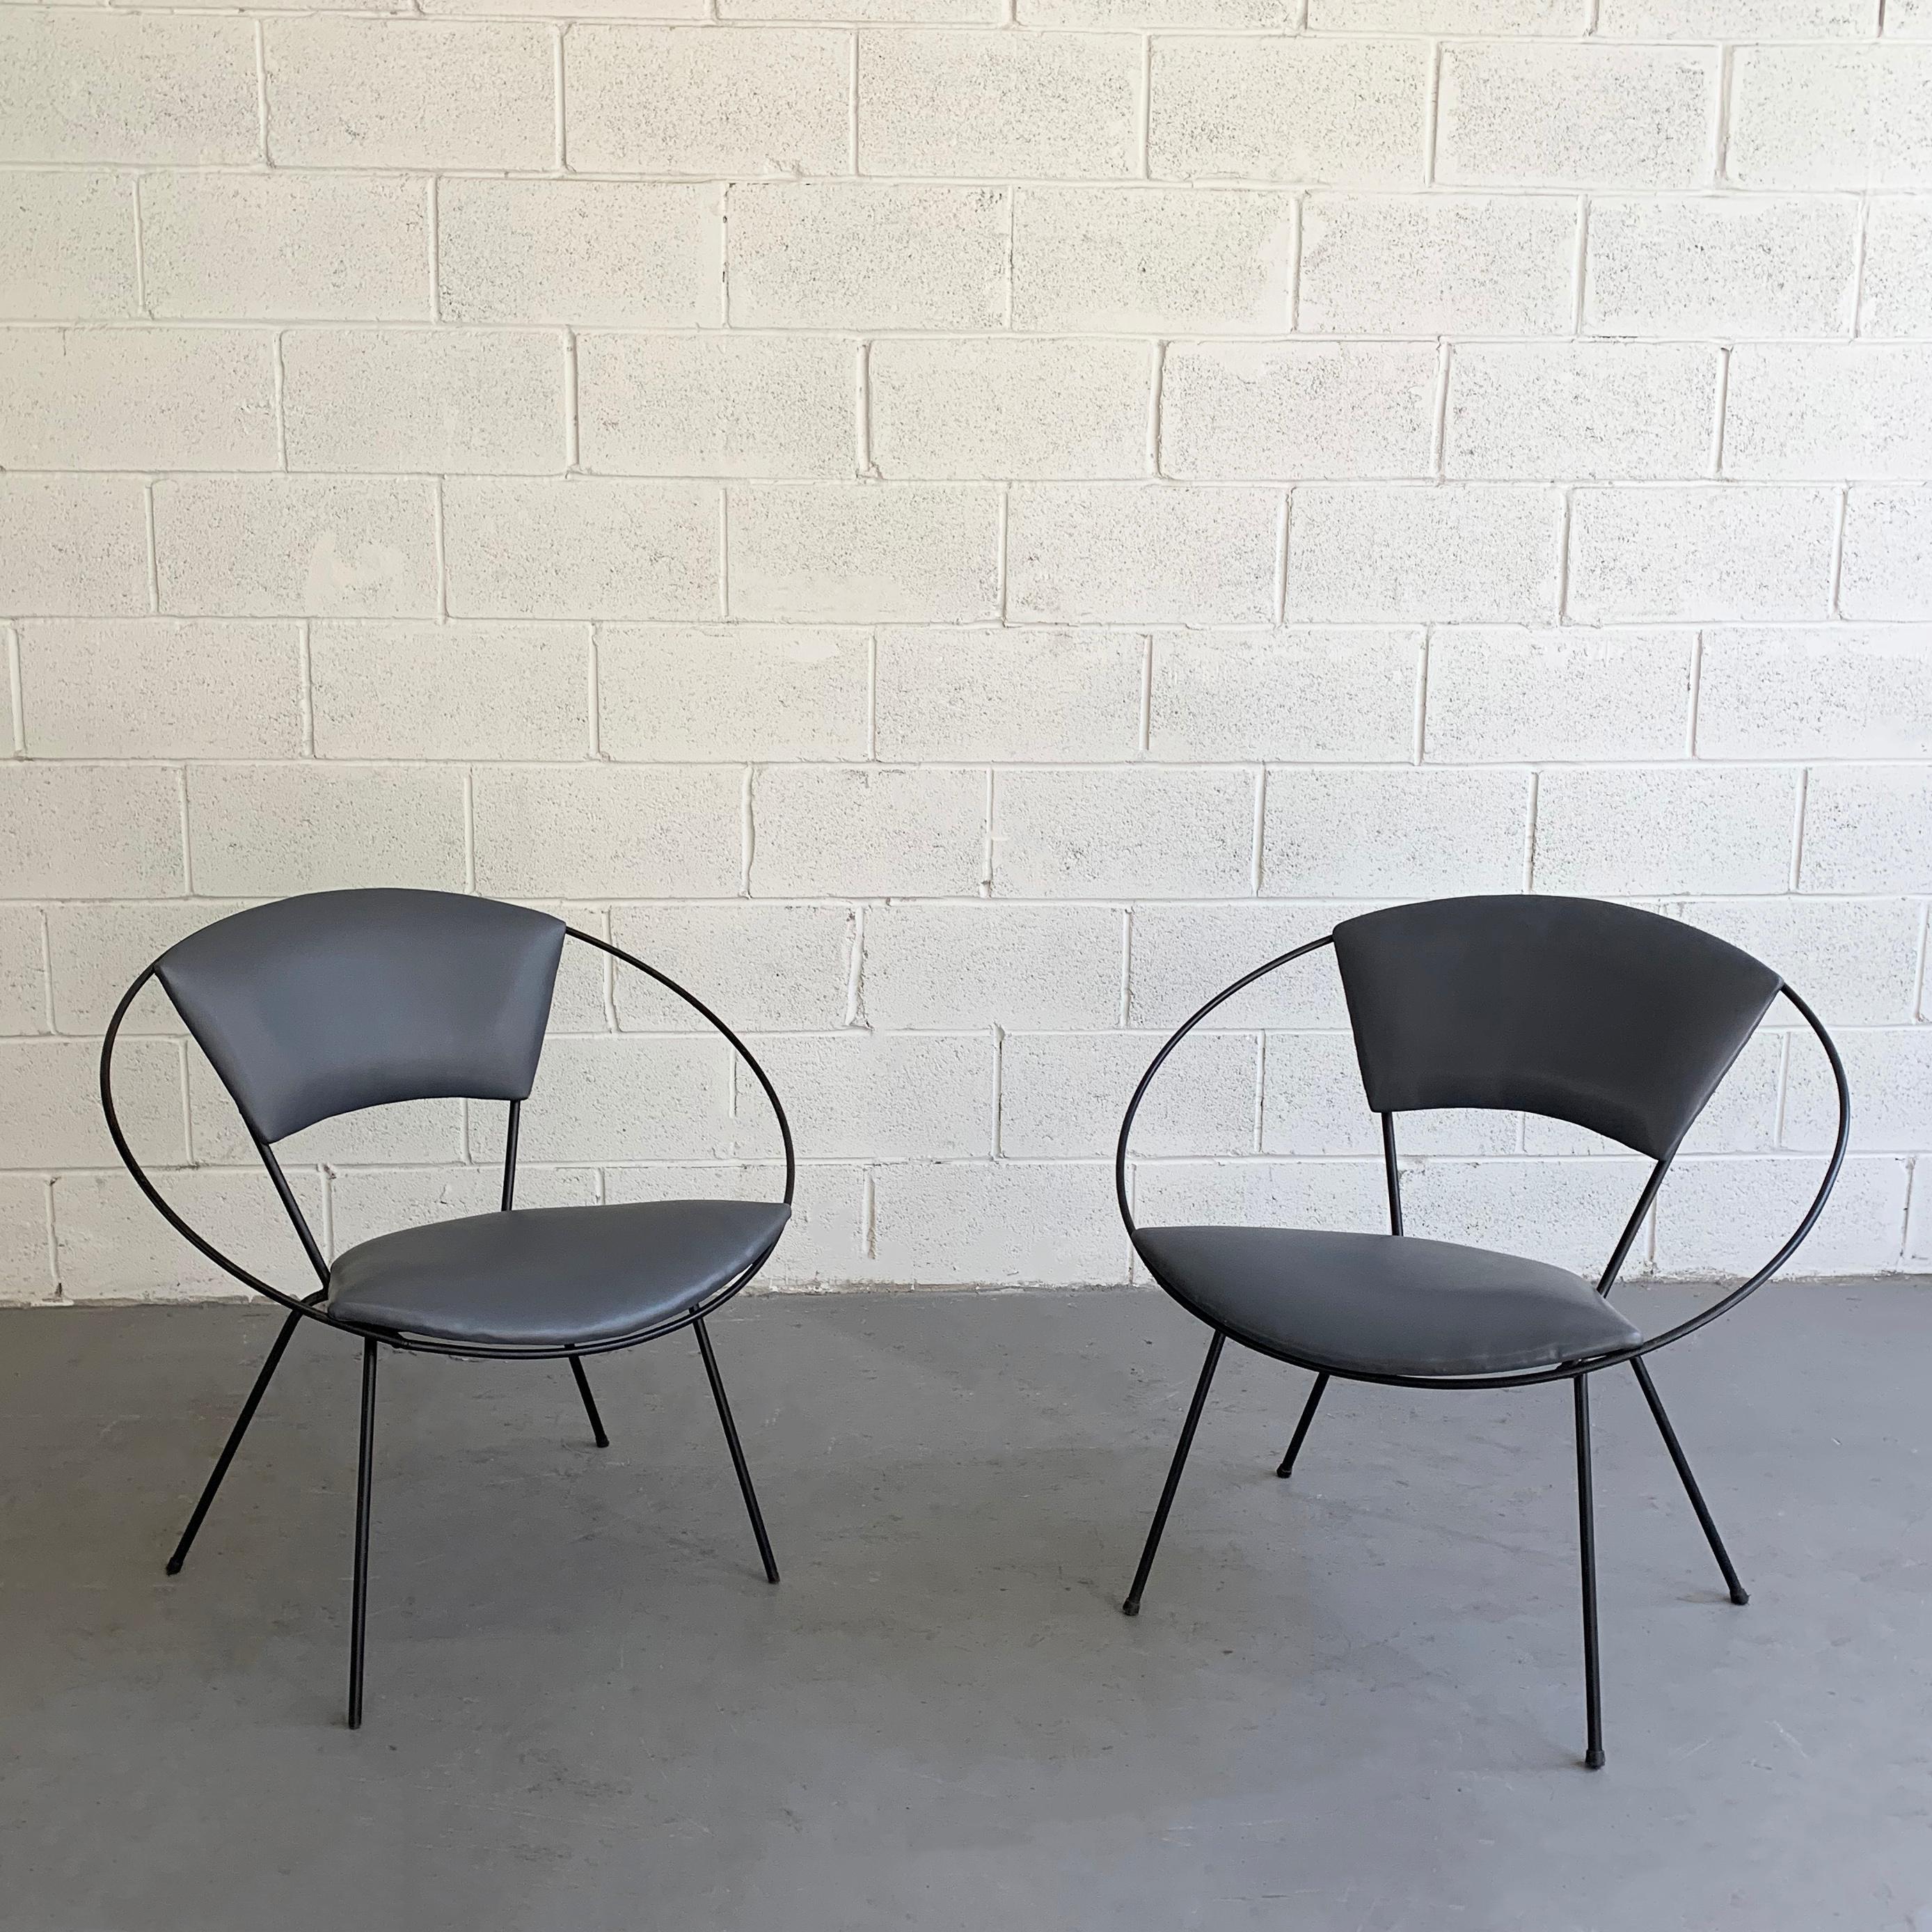 American Mid-Century Modern Wrought Iron Upholstered Hoop Chairs